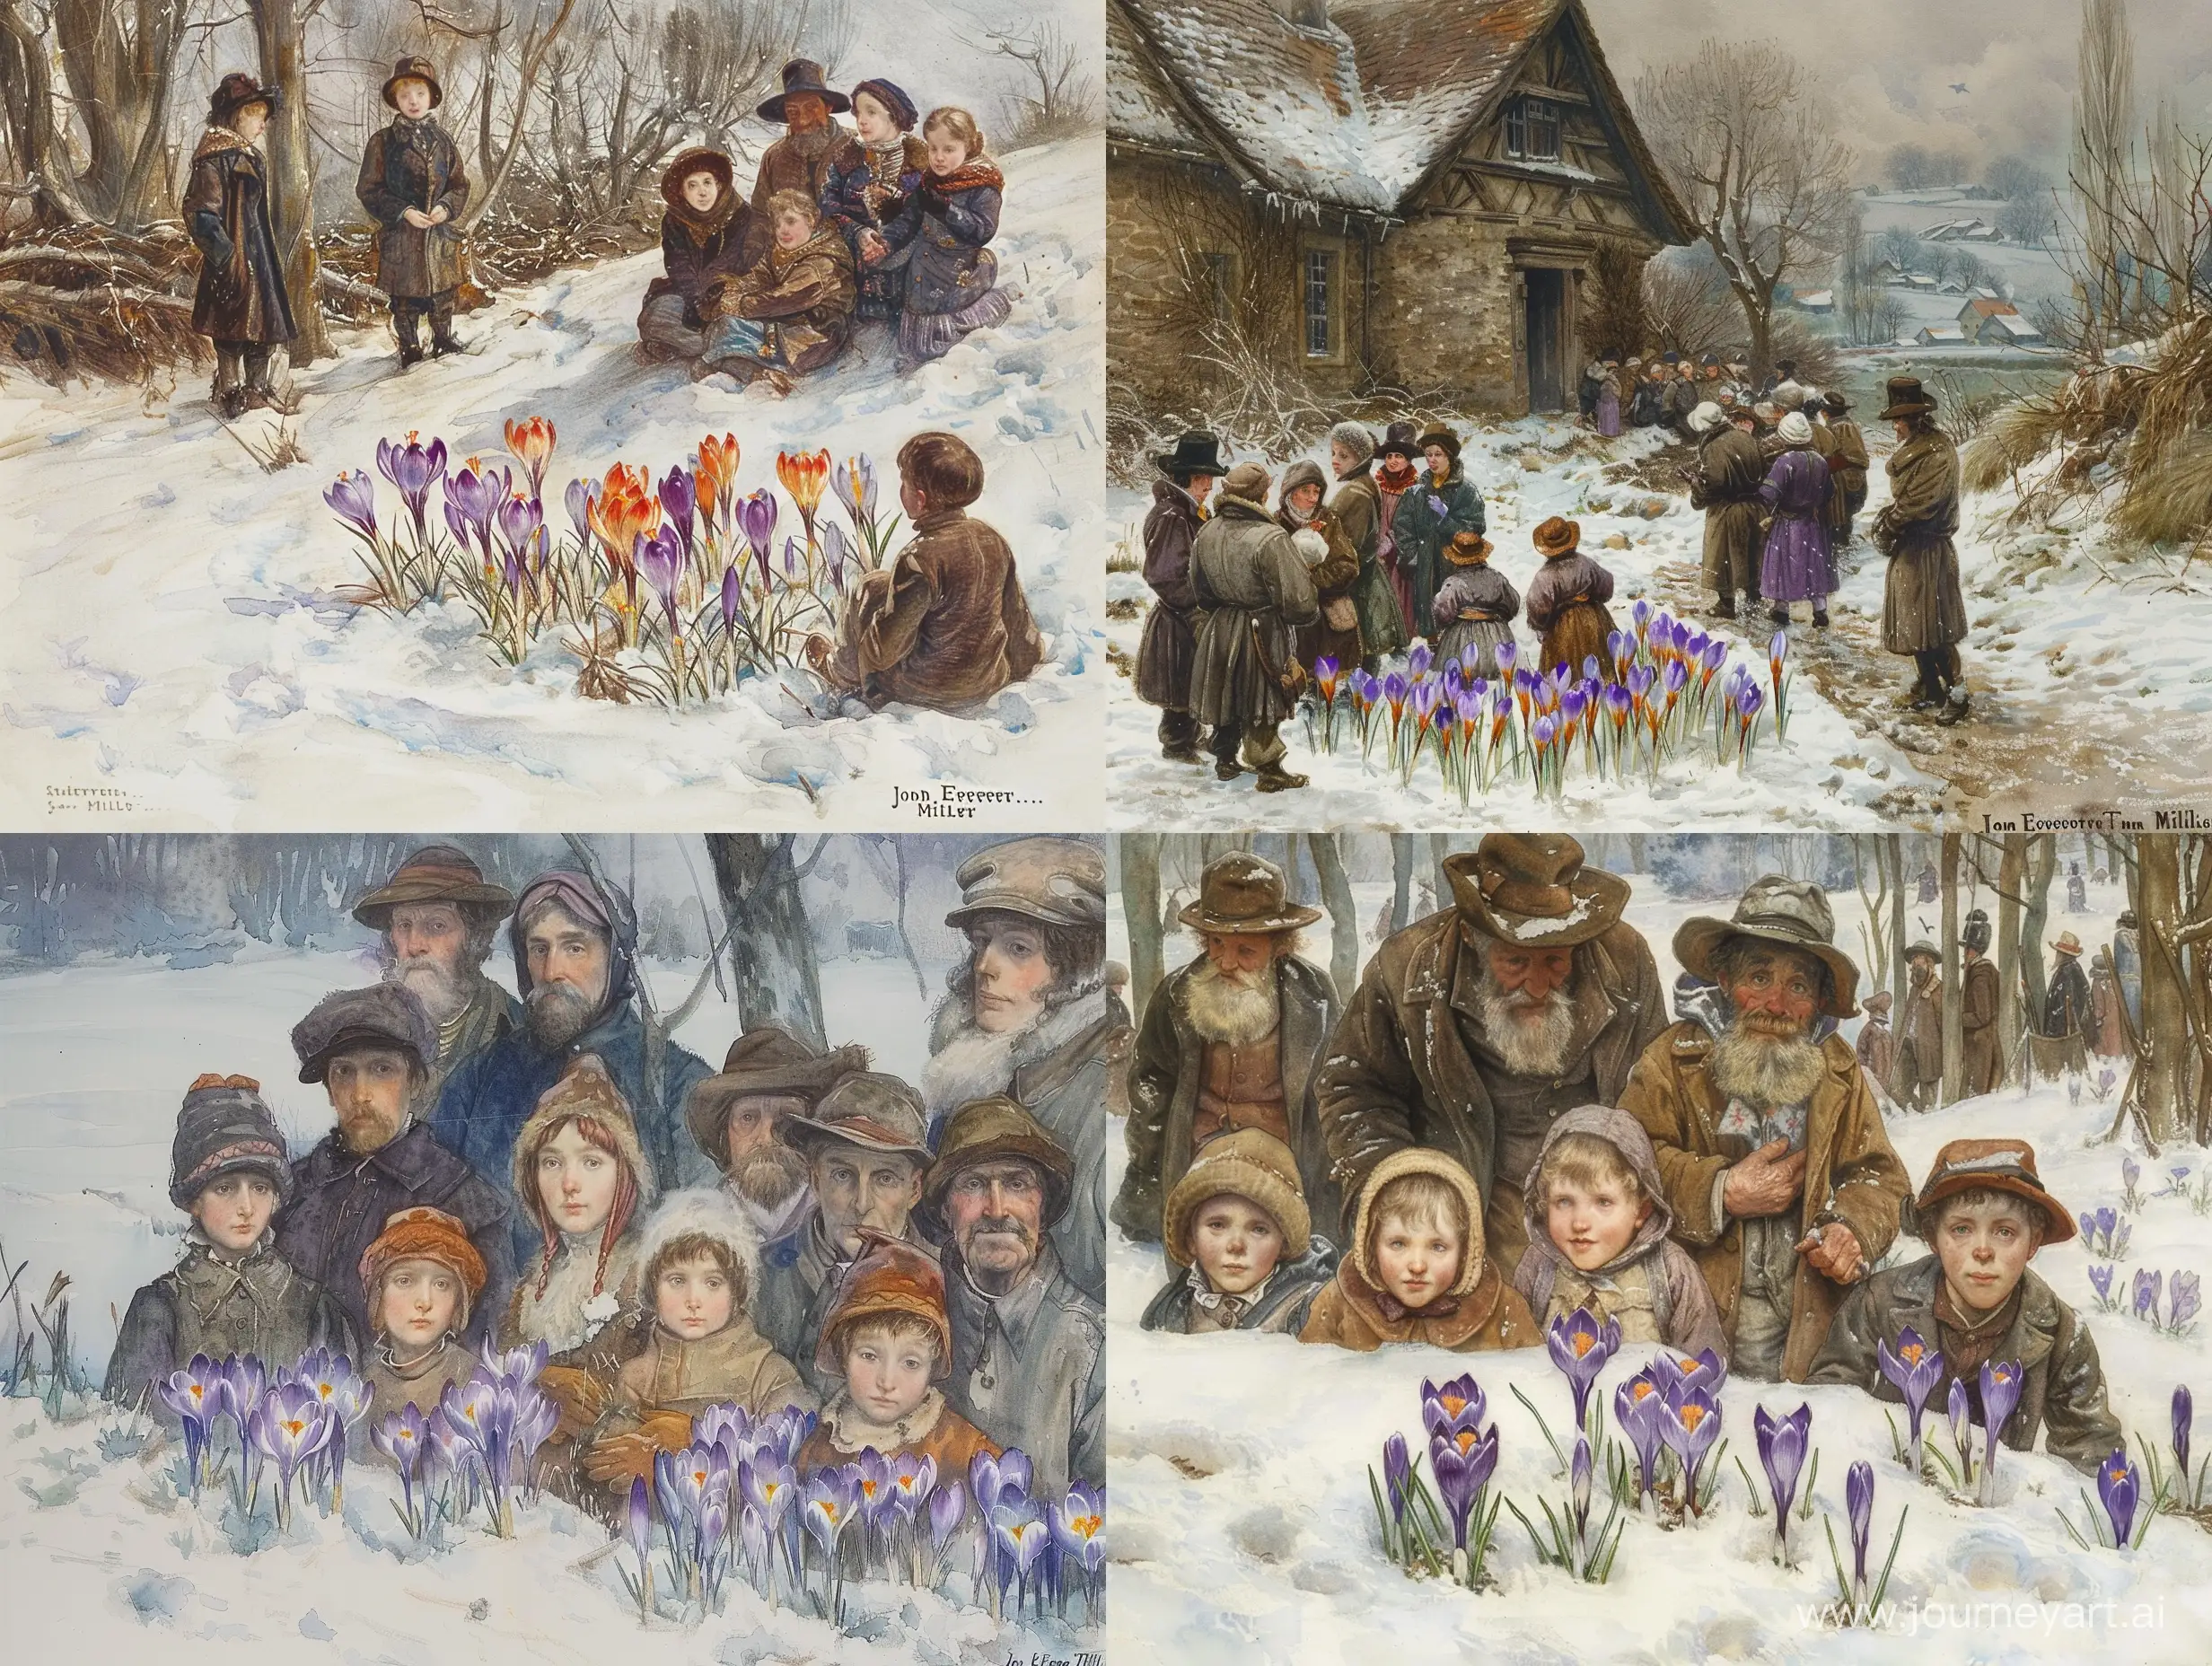 The central theme of the image is a crocuses in the snow. The focus is on a group of Krokusse im Schnee.  The artist, John Everett Millais setting to life through his Wathercolor painting. Millais employs the classic style of Watercolor painting, using rich and warm colors. The winter palette may include cool tones like blues and grays, contrasting with the vibrant colors of the crocuses.  Millais pays attention to detail, emphasizing the unique facial expressions and features of each individual. These details add depth and authenticity to the overall composition.